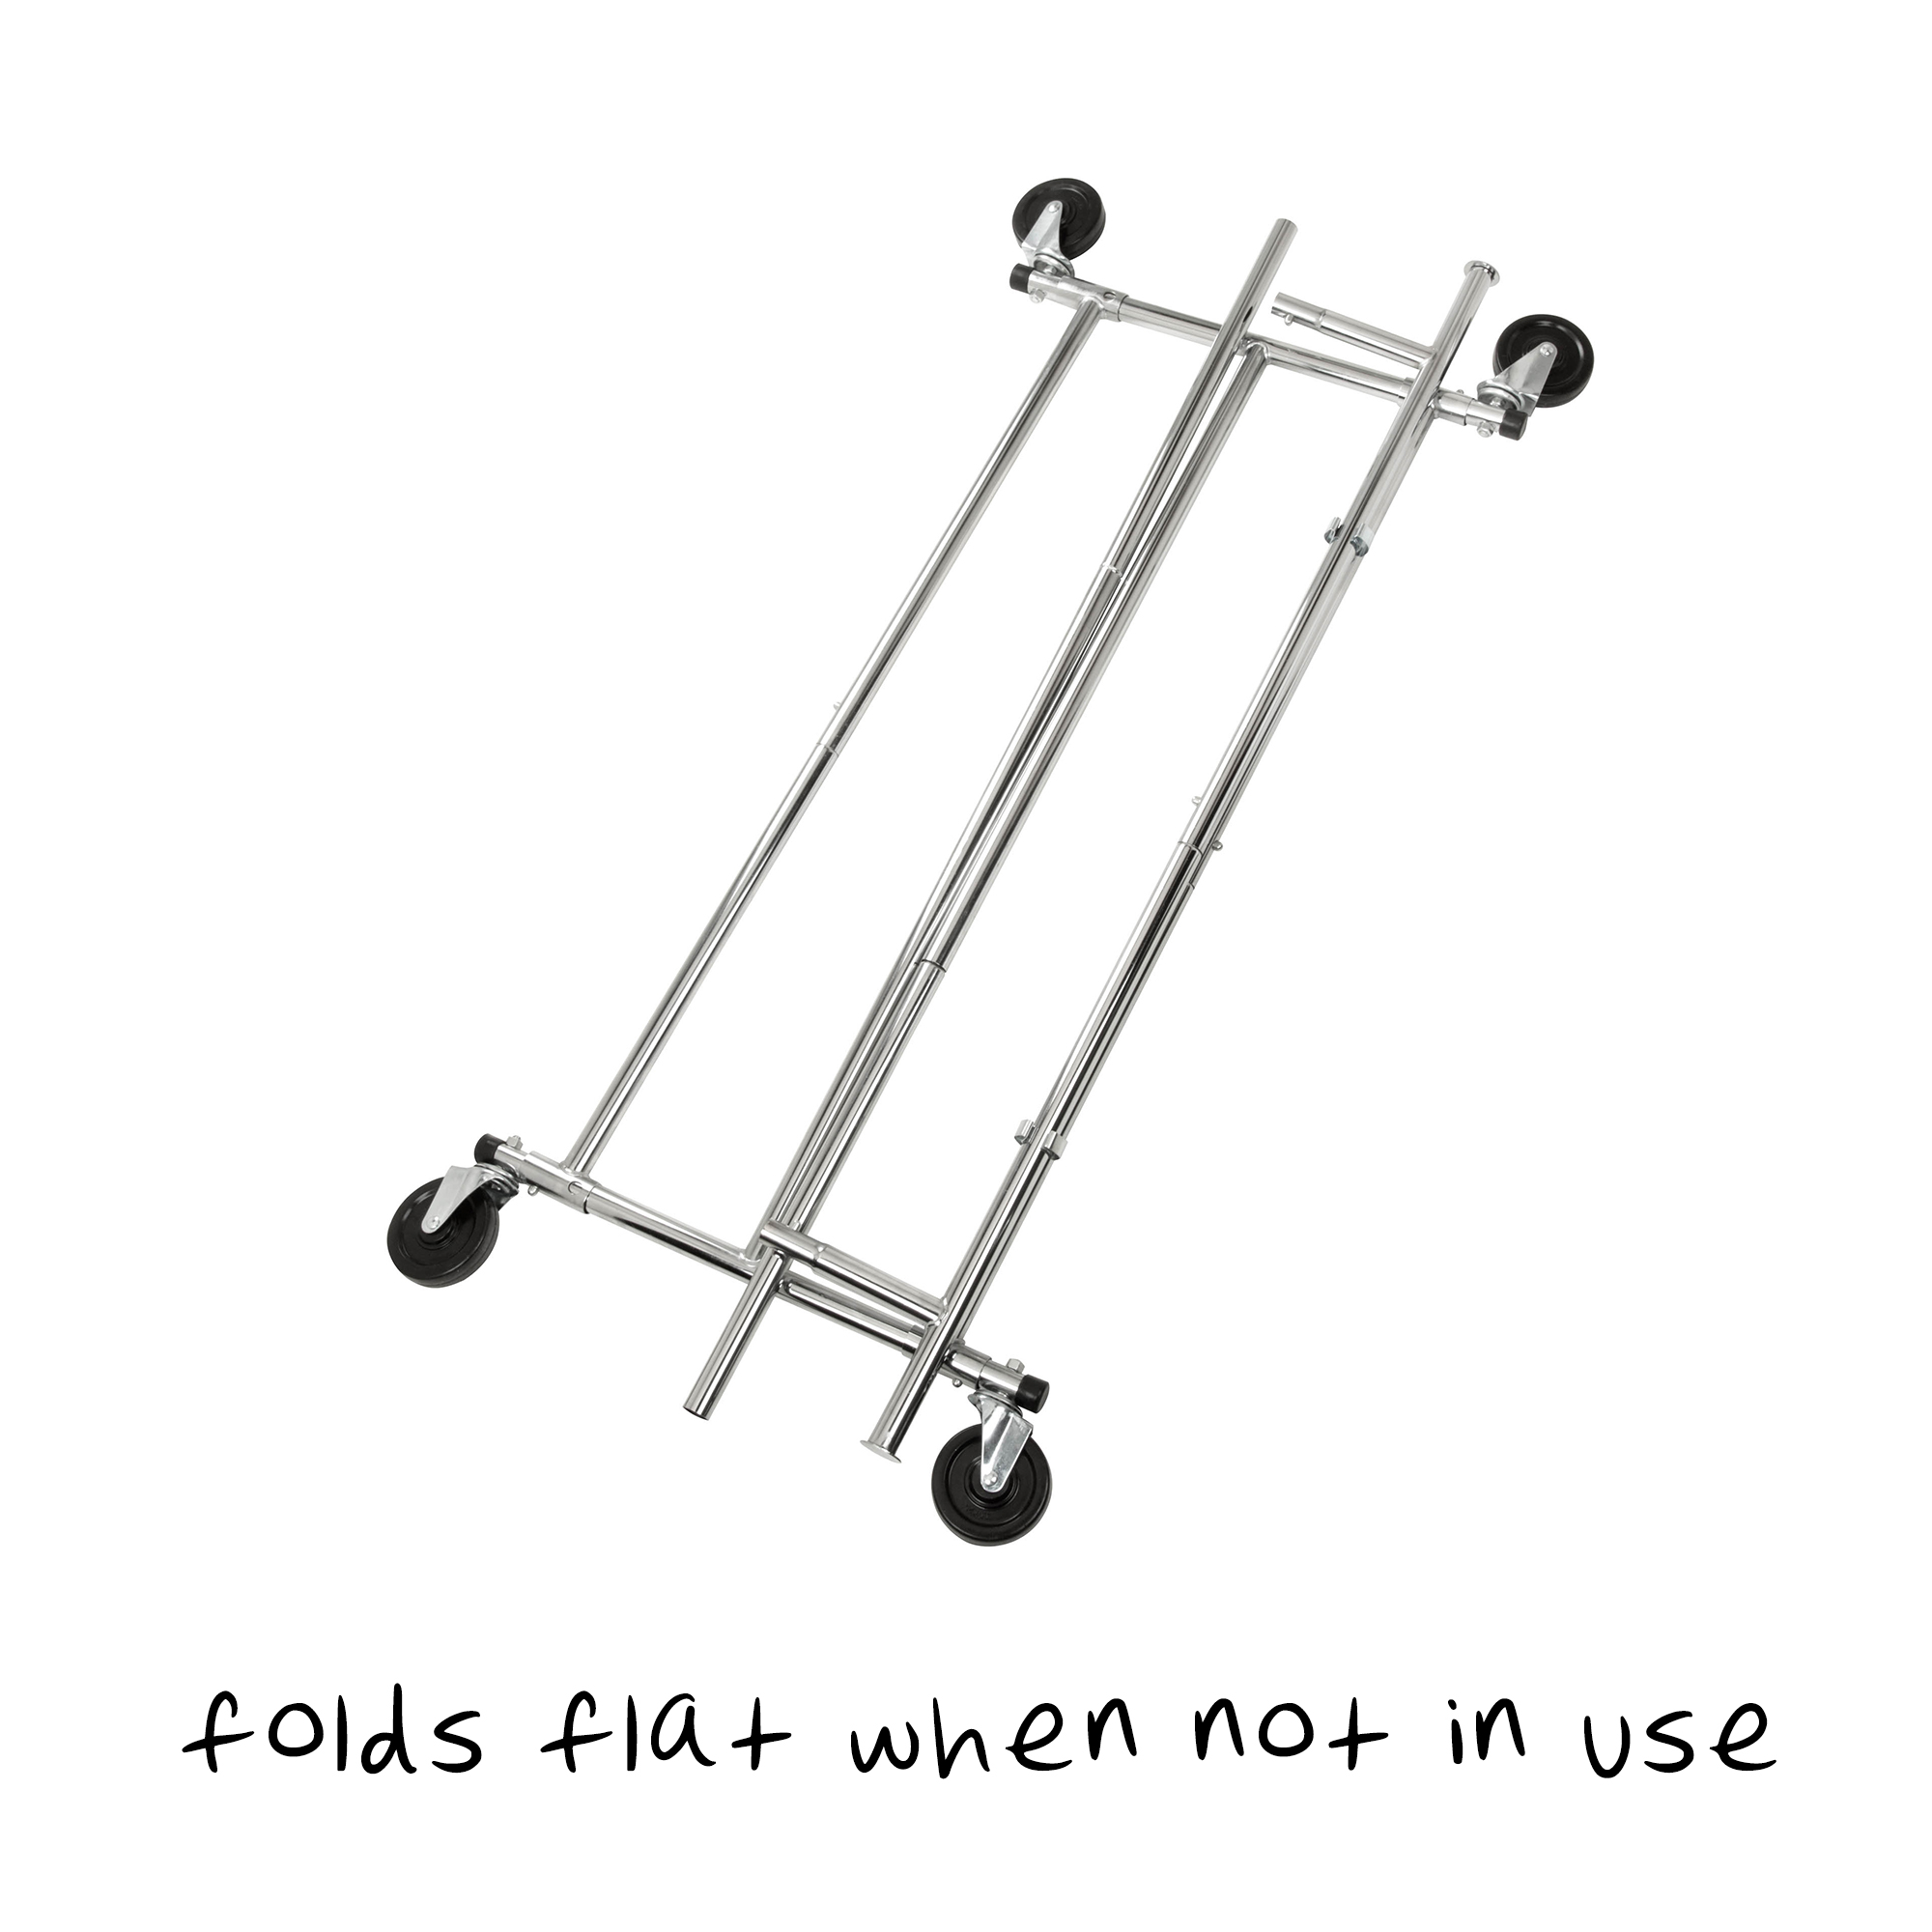 Honey-Can-Do Steel Folding Expandable Rolling Clothes Rack, Chrome - image 5 of 8